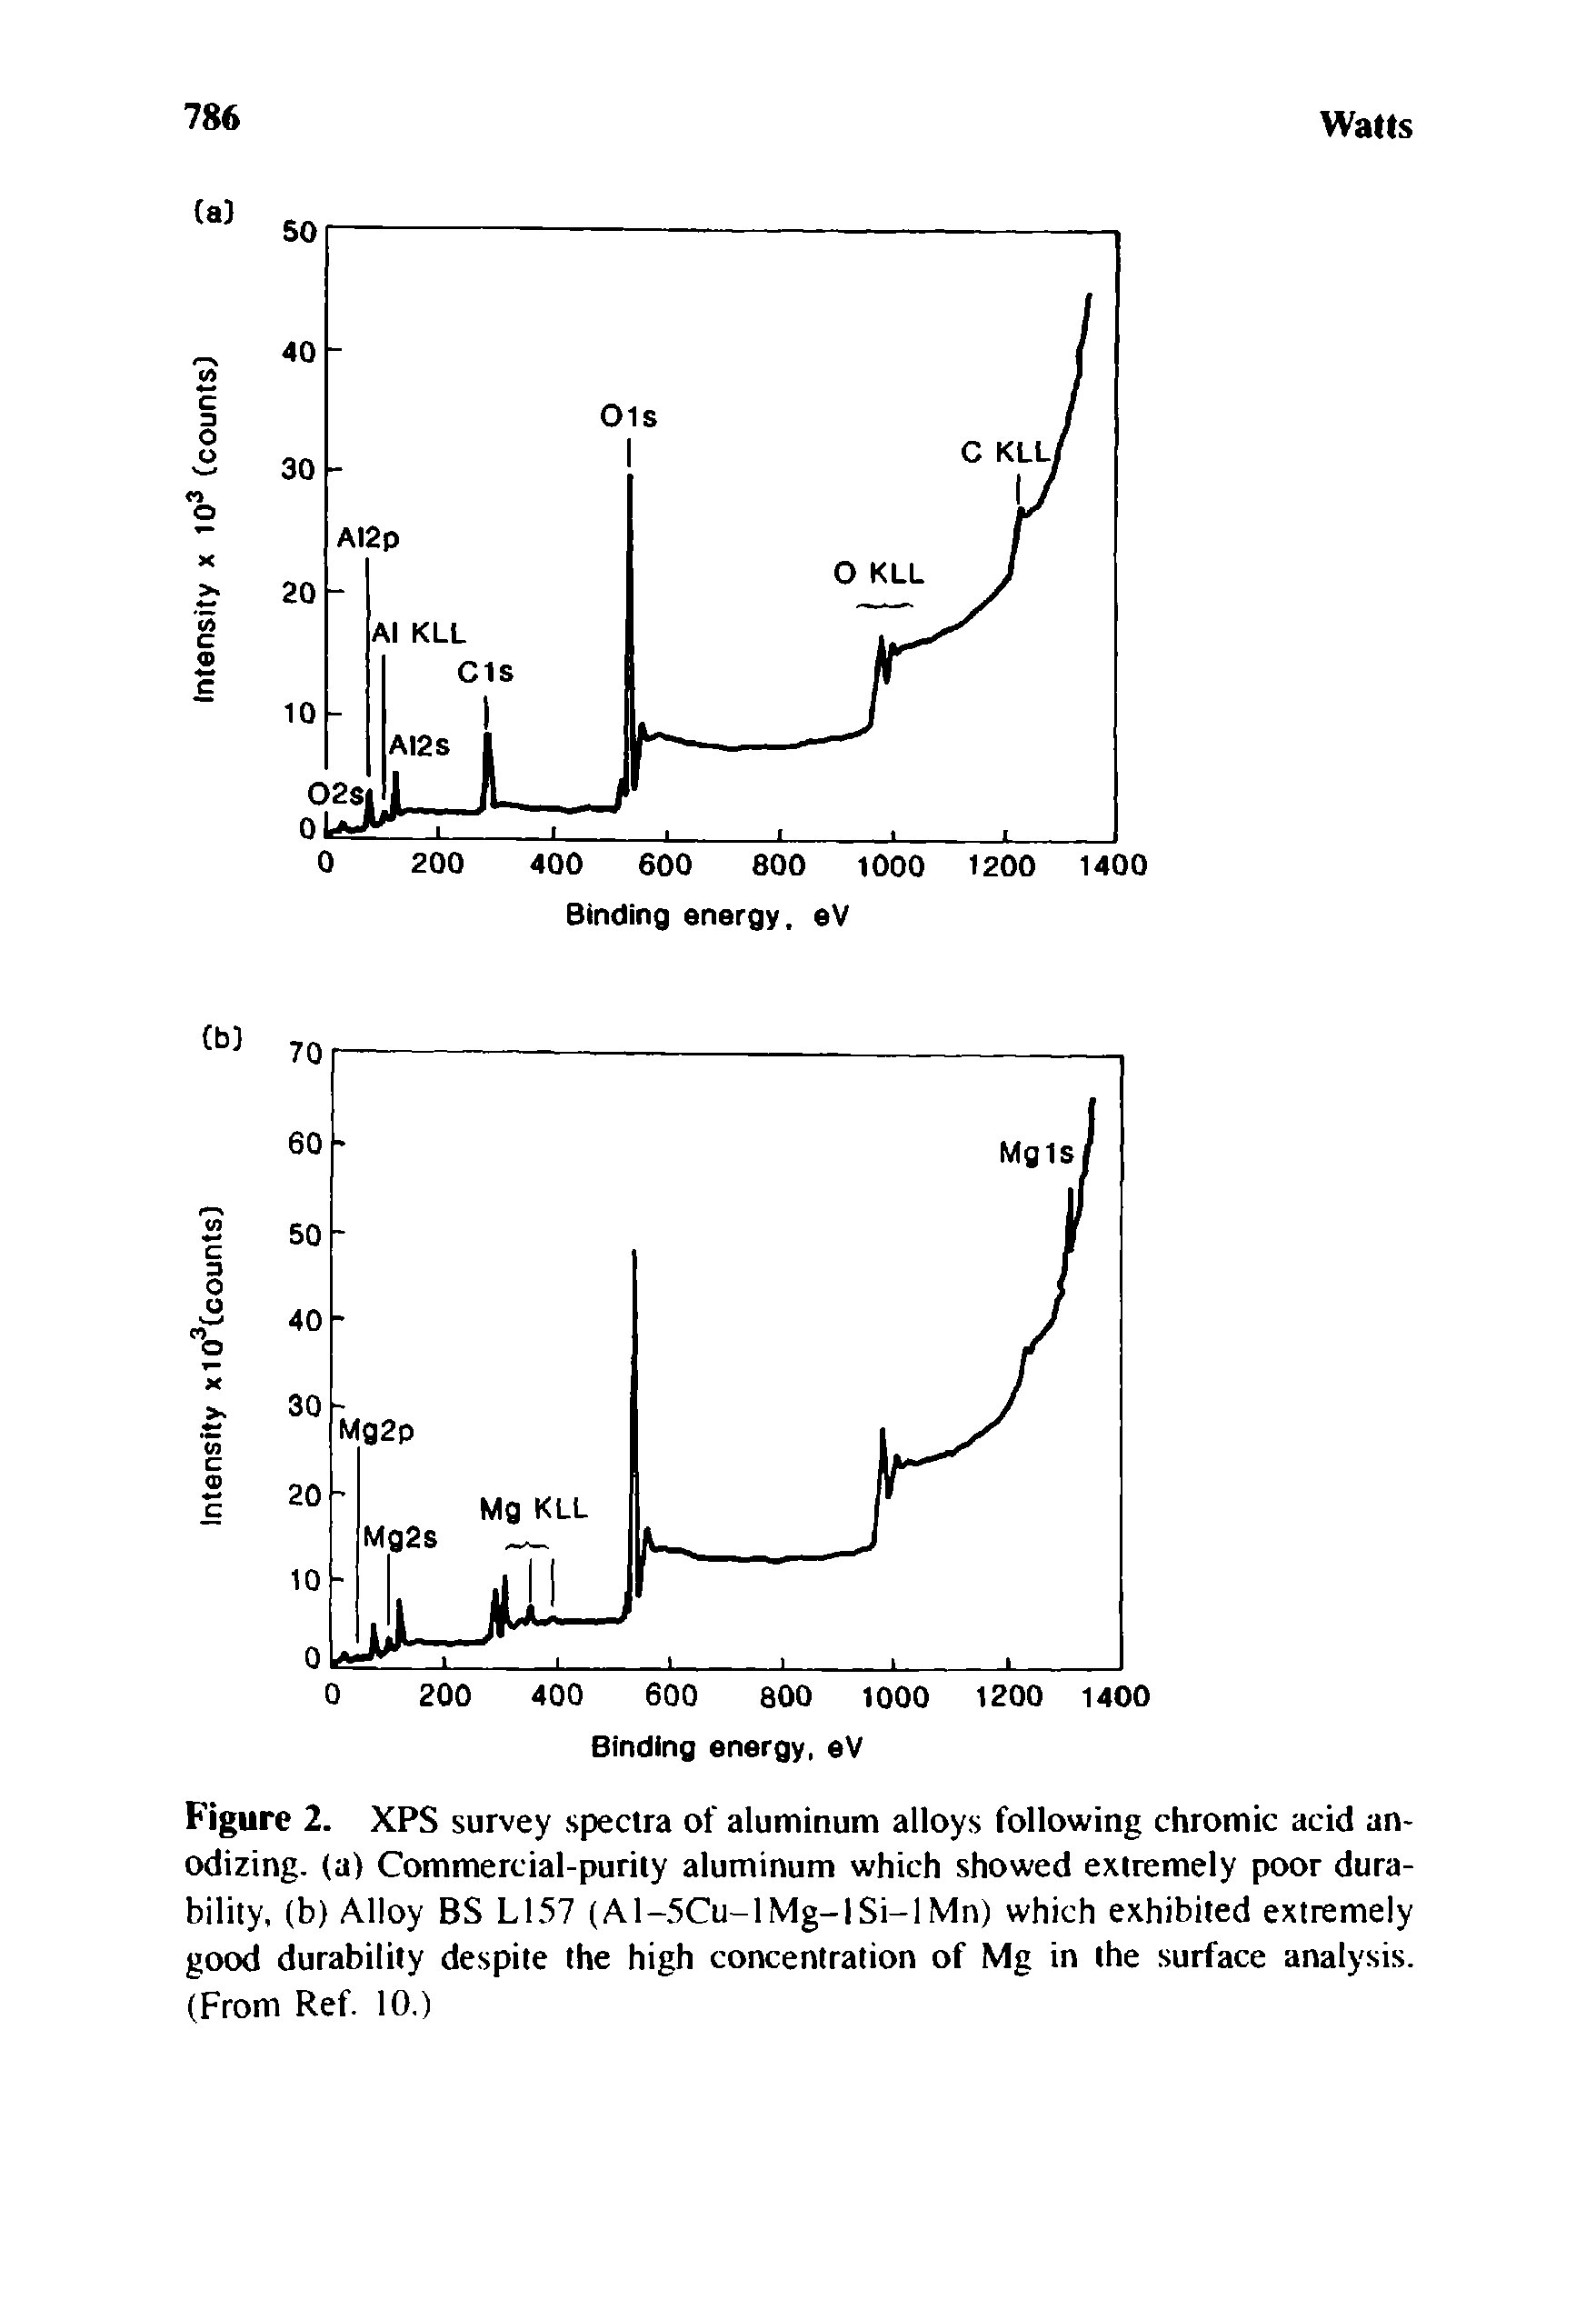 Figure 2. XPS survey spectra of aluminum alloys following chromic acid anodizing. (a) Commercial-purity aluminum which showed extremely poor durability, (b) Alloy BS LI57 (Al-5Cu-lMg-lSi-lMn) which exhibited extremely good durability despite the high concentration of Mg in the surface analysis. (From Ref. 10.)...